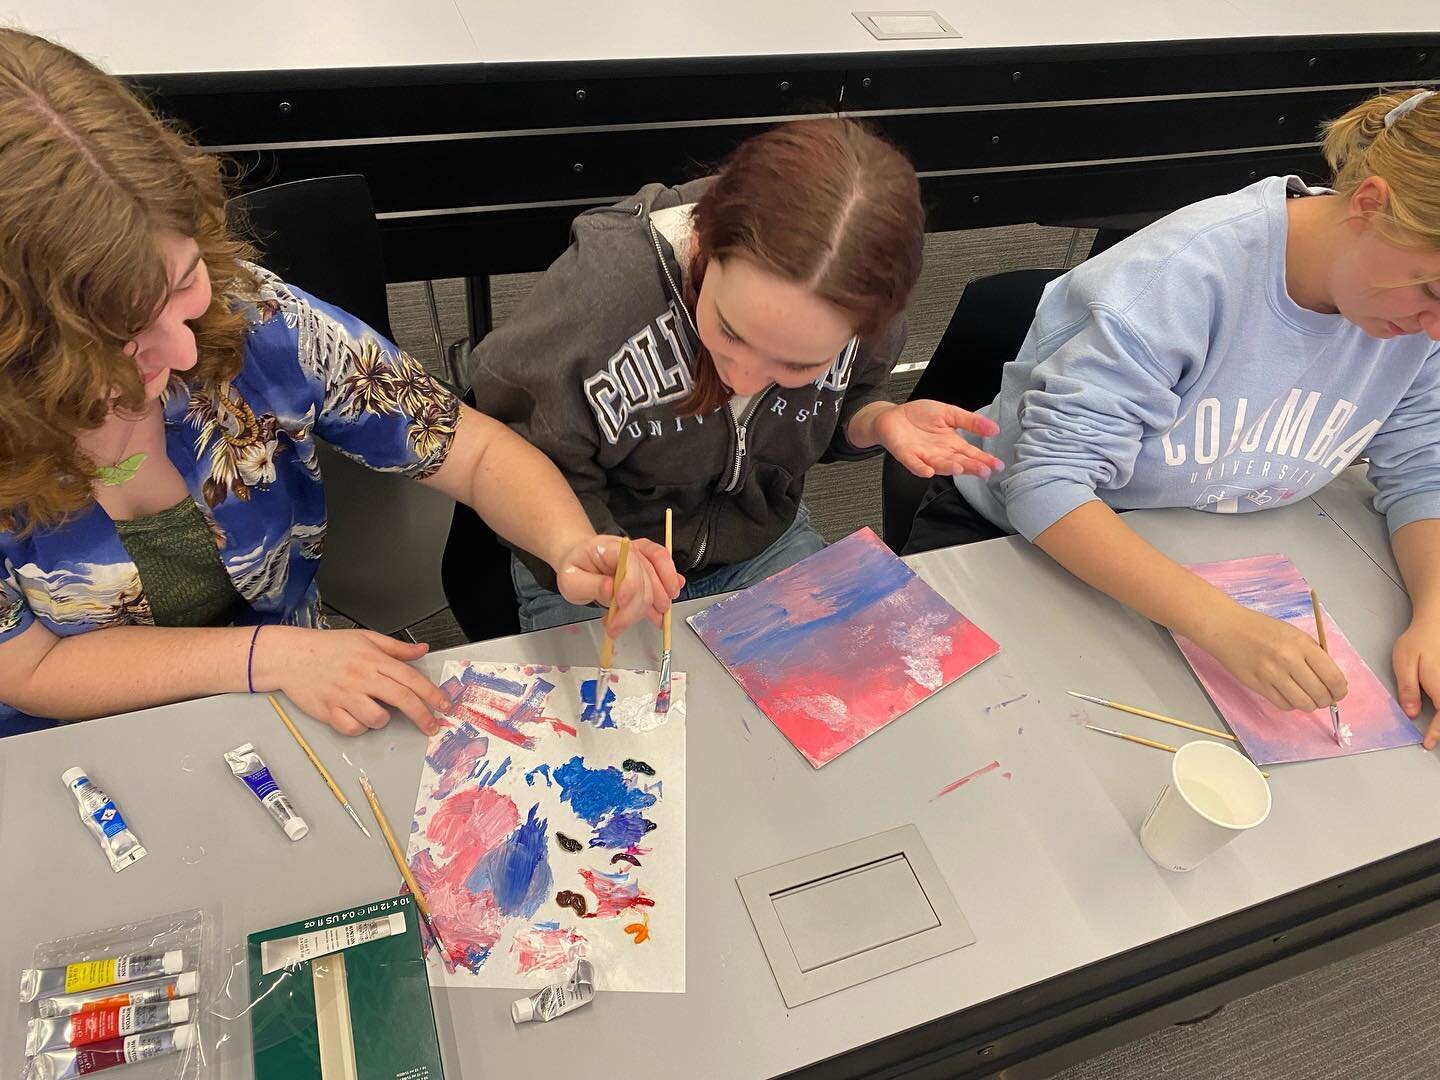 Bob Ross painting night + Fotografiska museum visit! 

A huge shoutout to our Director of Community, Lila Spiro, for planning these fun events to wrap up spring semester!